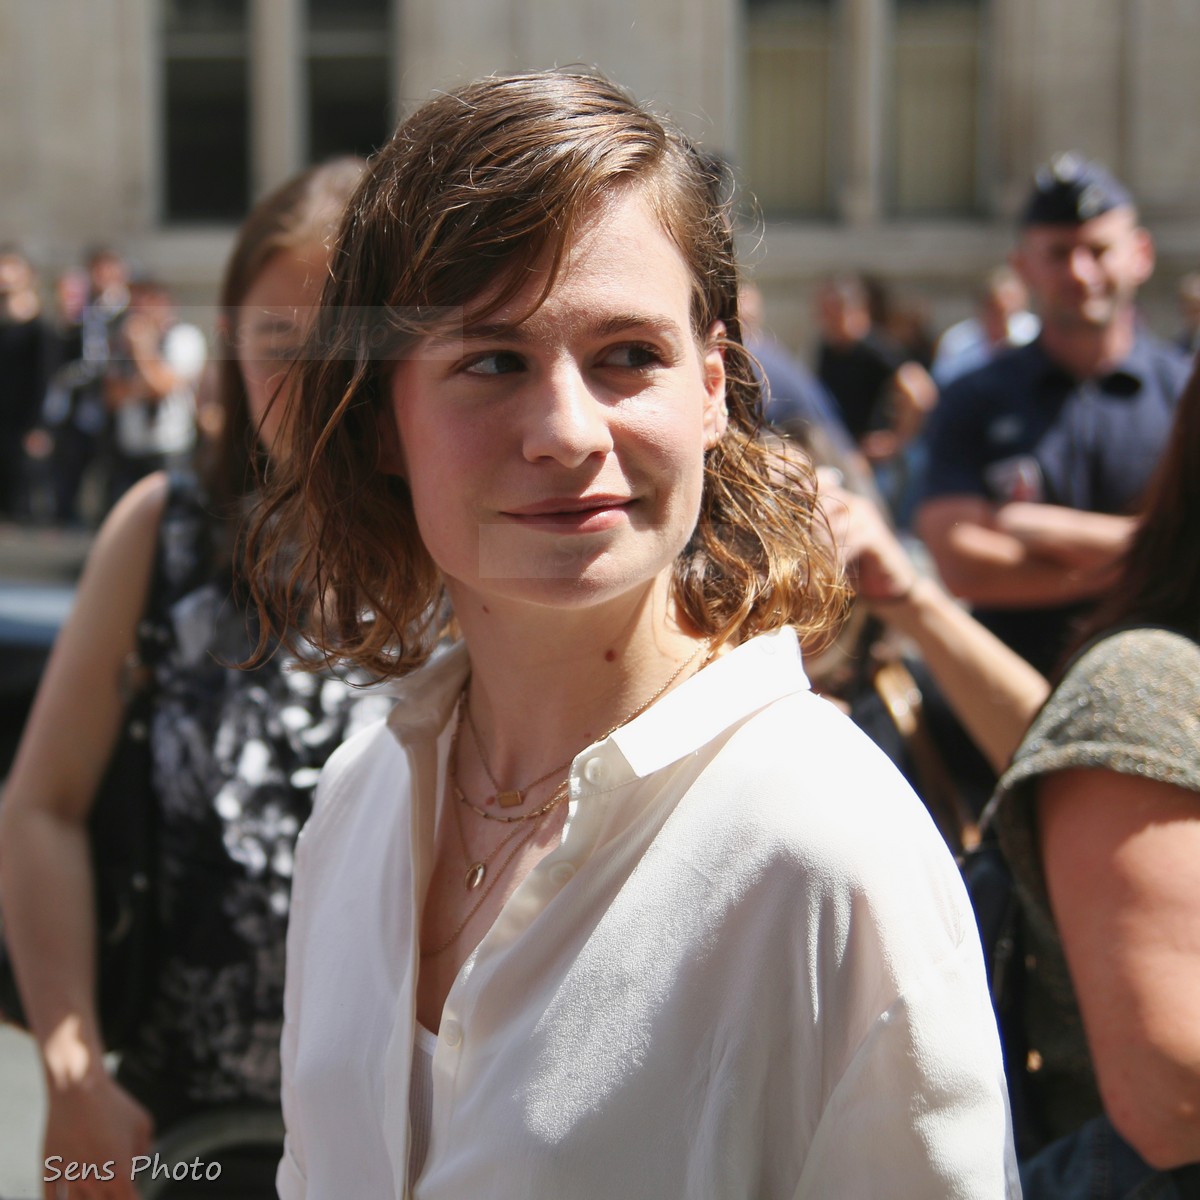 singer Christine and the Queens attends Jean-Paul Gaultier Fashion Show